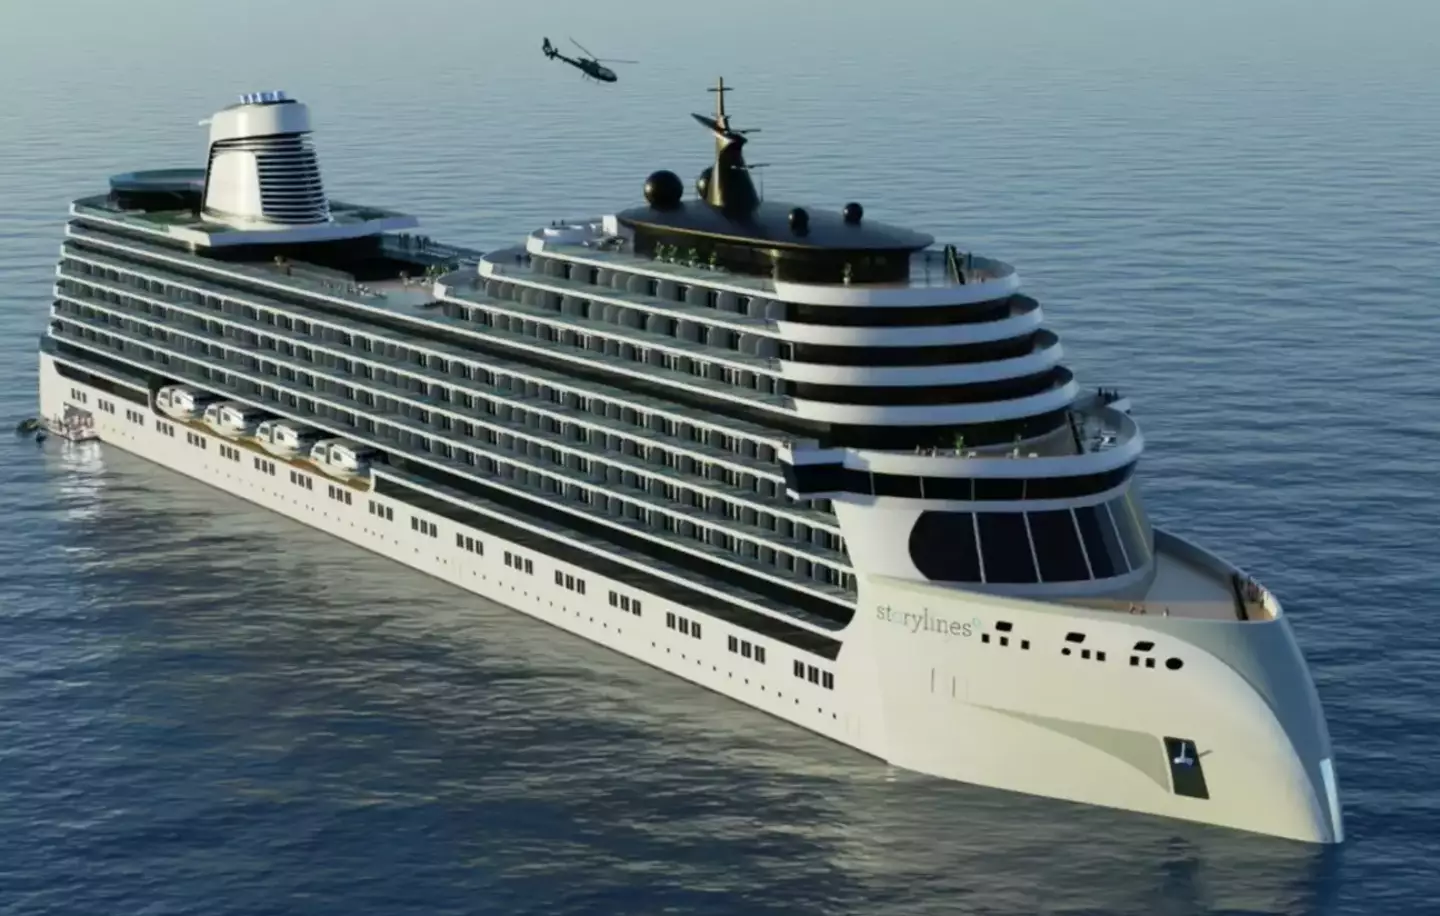 A visual rendering of the colossal ship 18-deck ship.